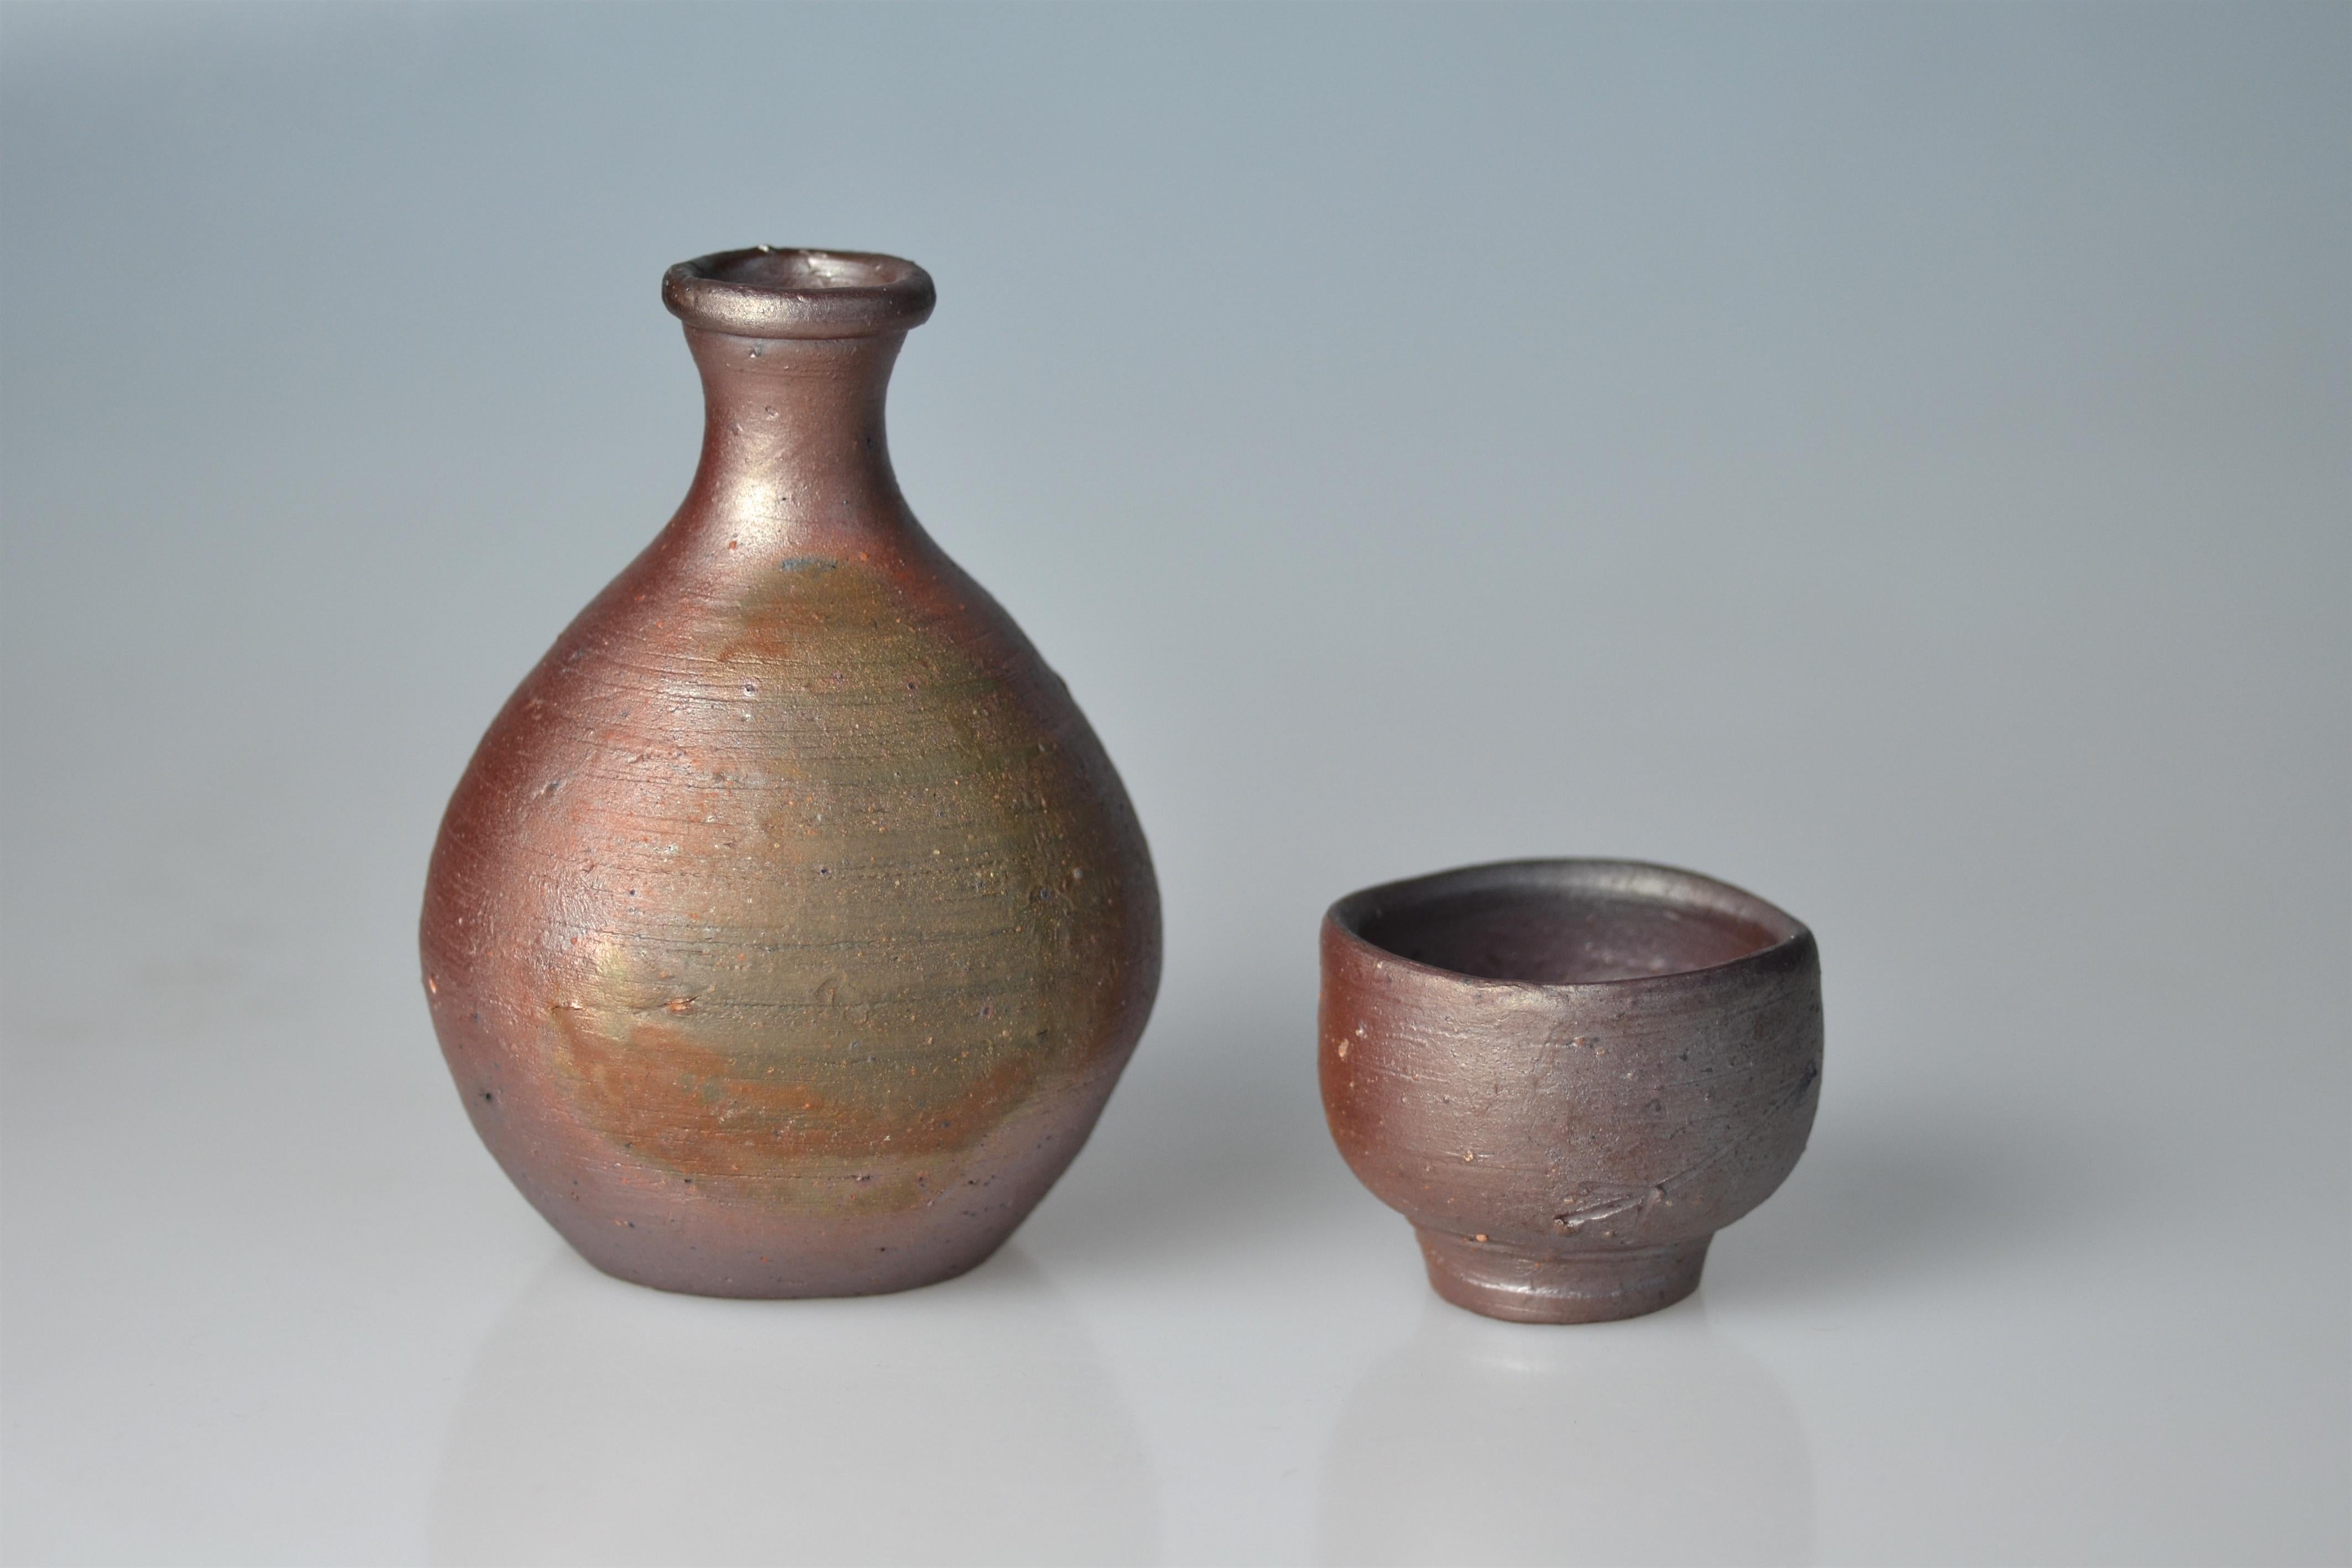 This set of a Bizen sake flask and cup was made by Fujiwara Yu who was born 1932 in Honami in Bizen, Okayama prefecture. As son of famous Fujiwara Kei (1899-1983) he has also been awarded the title 